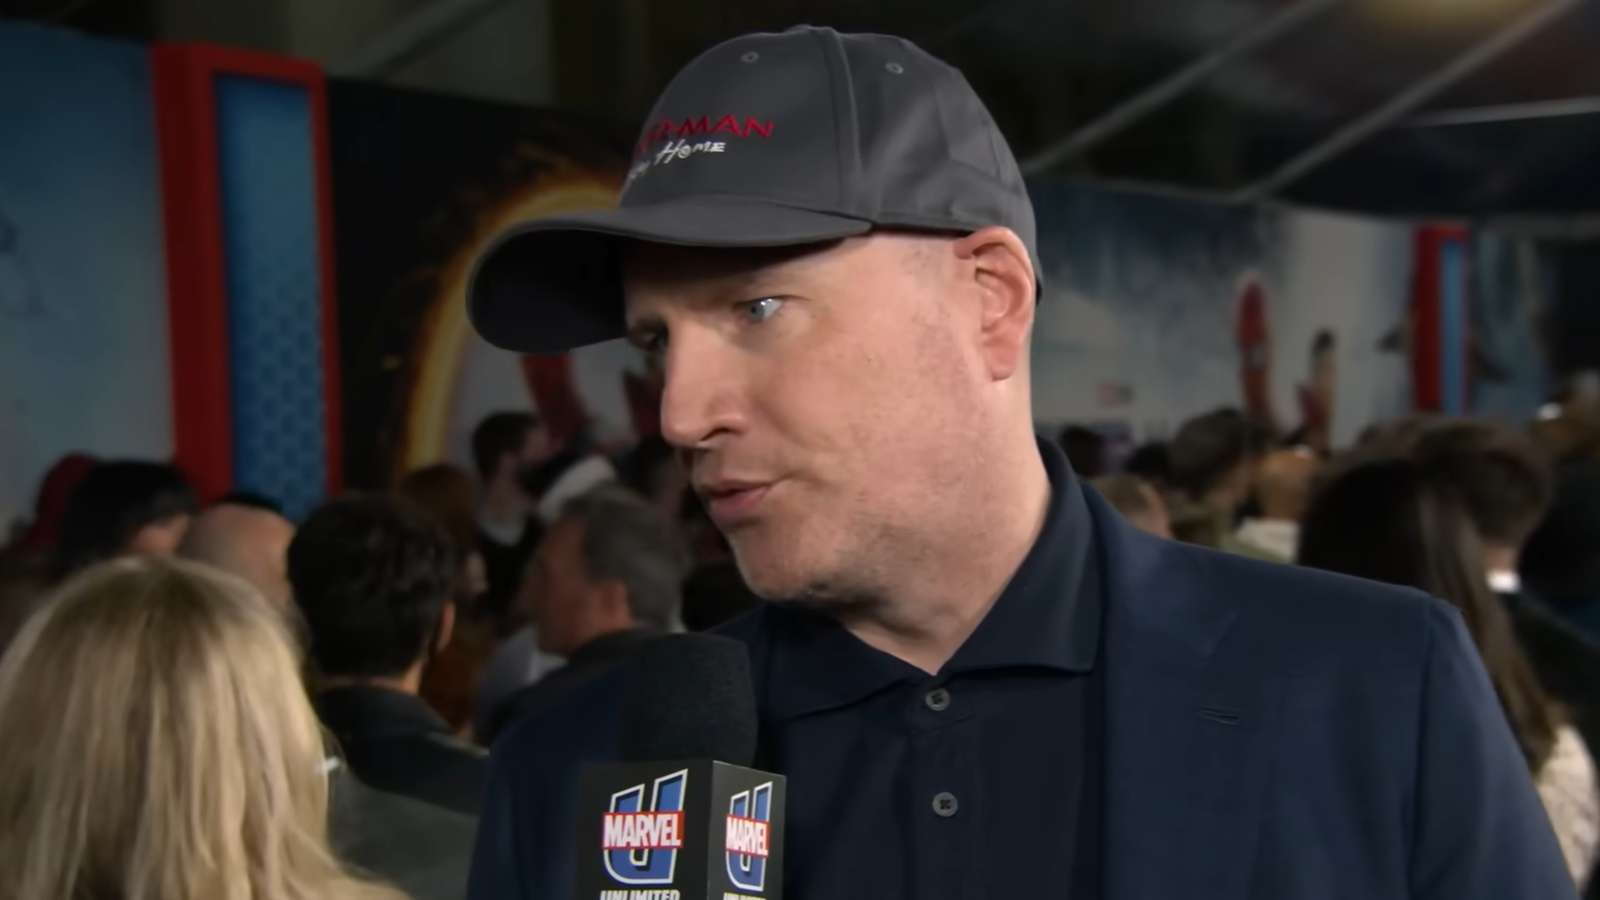 Kevin Feige at Spider-Man No Way Home premiere, speaking on the direction of the franchise.